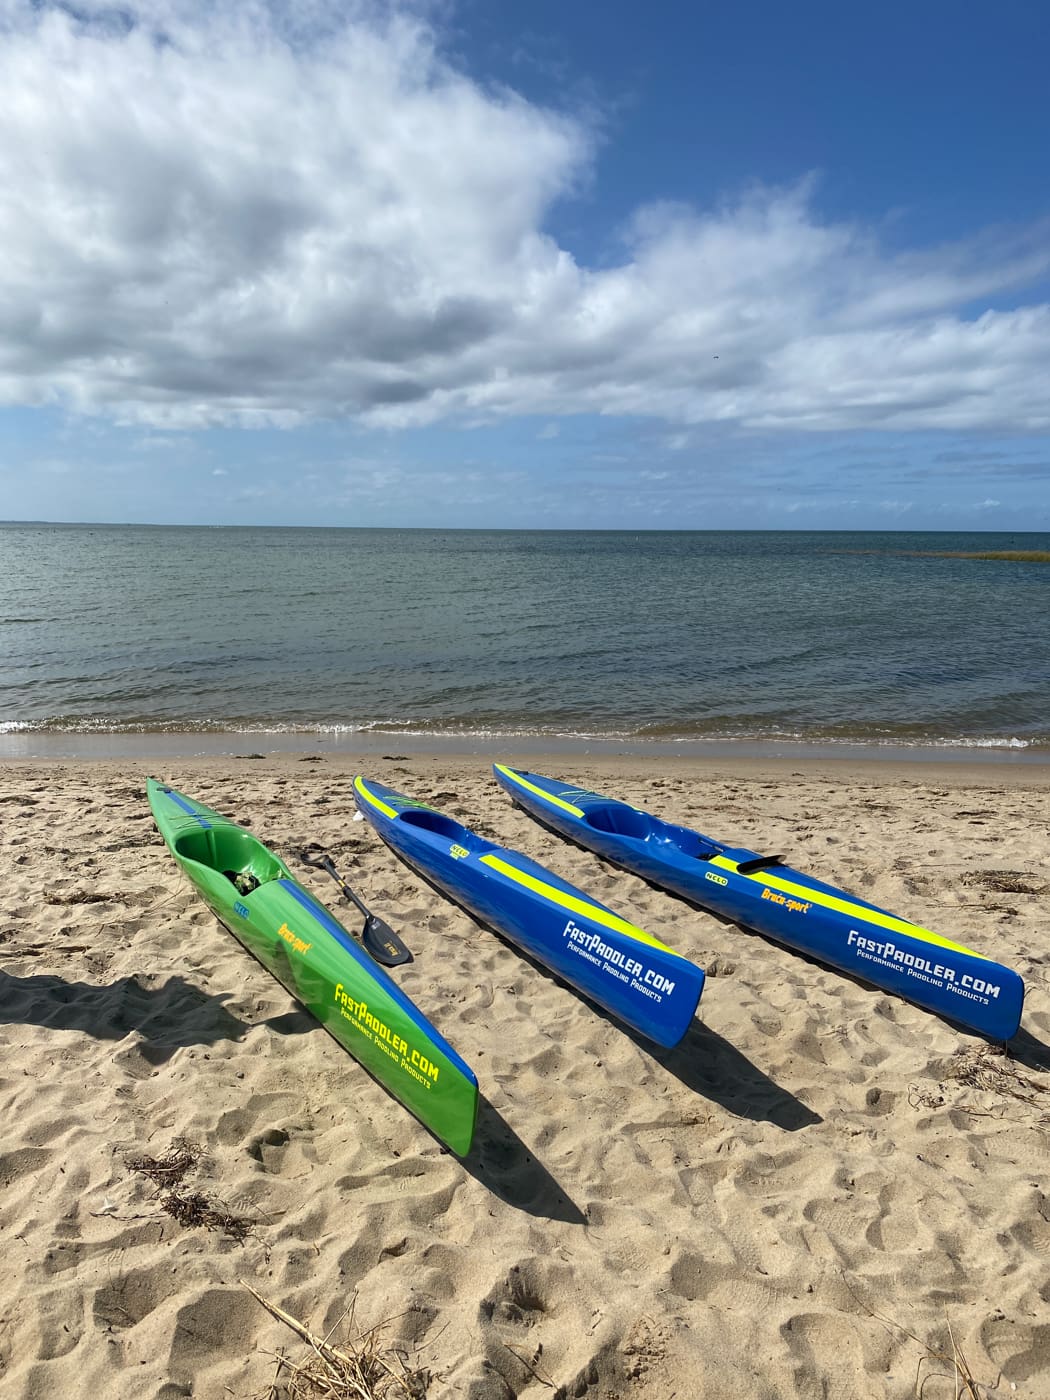 Nelo Surfski Lengths, a 540, 550 and 560 on the beach side by side